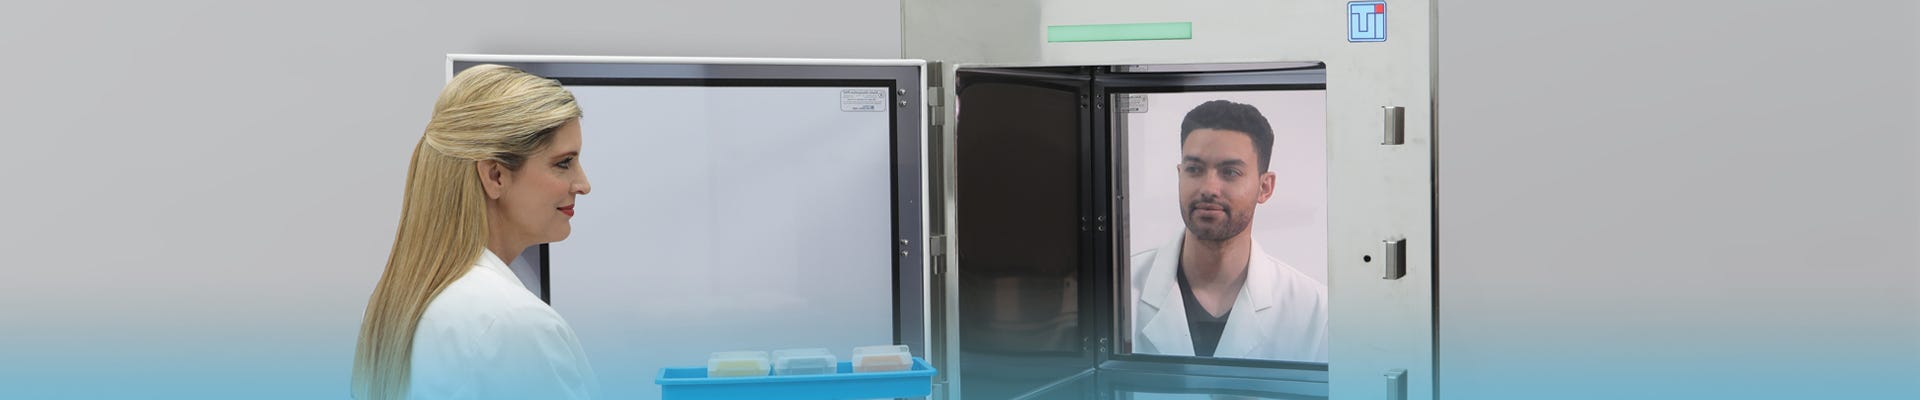 Cleanroom pass-through chambers ensure contamination-free parts transfer into a clean room or lab; Smart models include door status alerts and more!